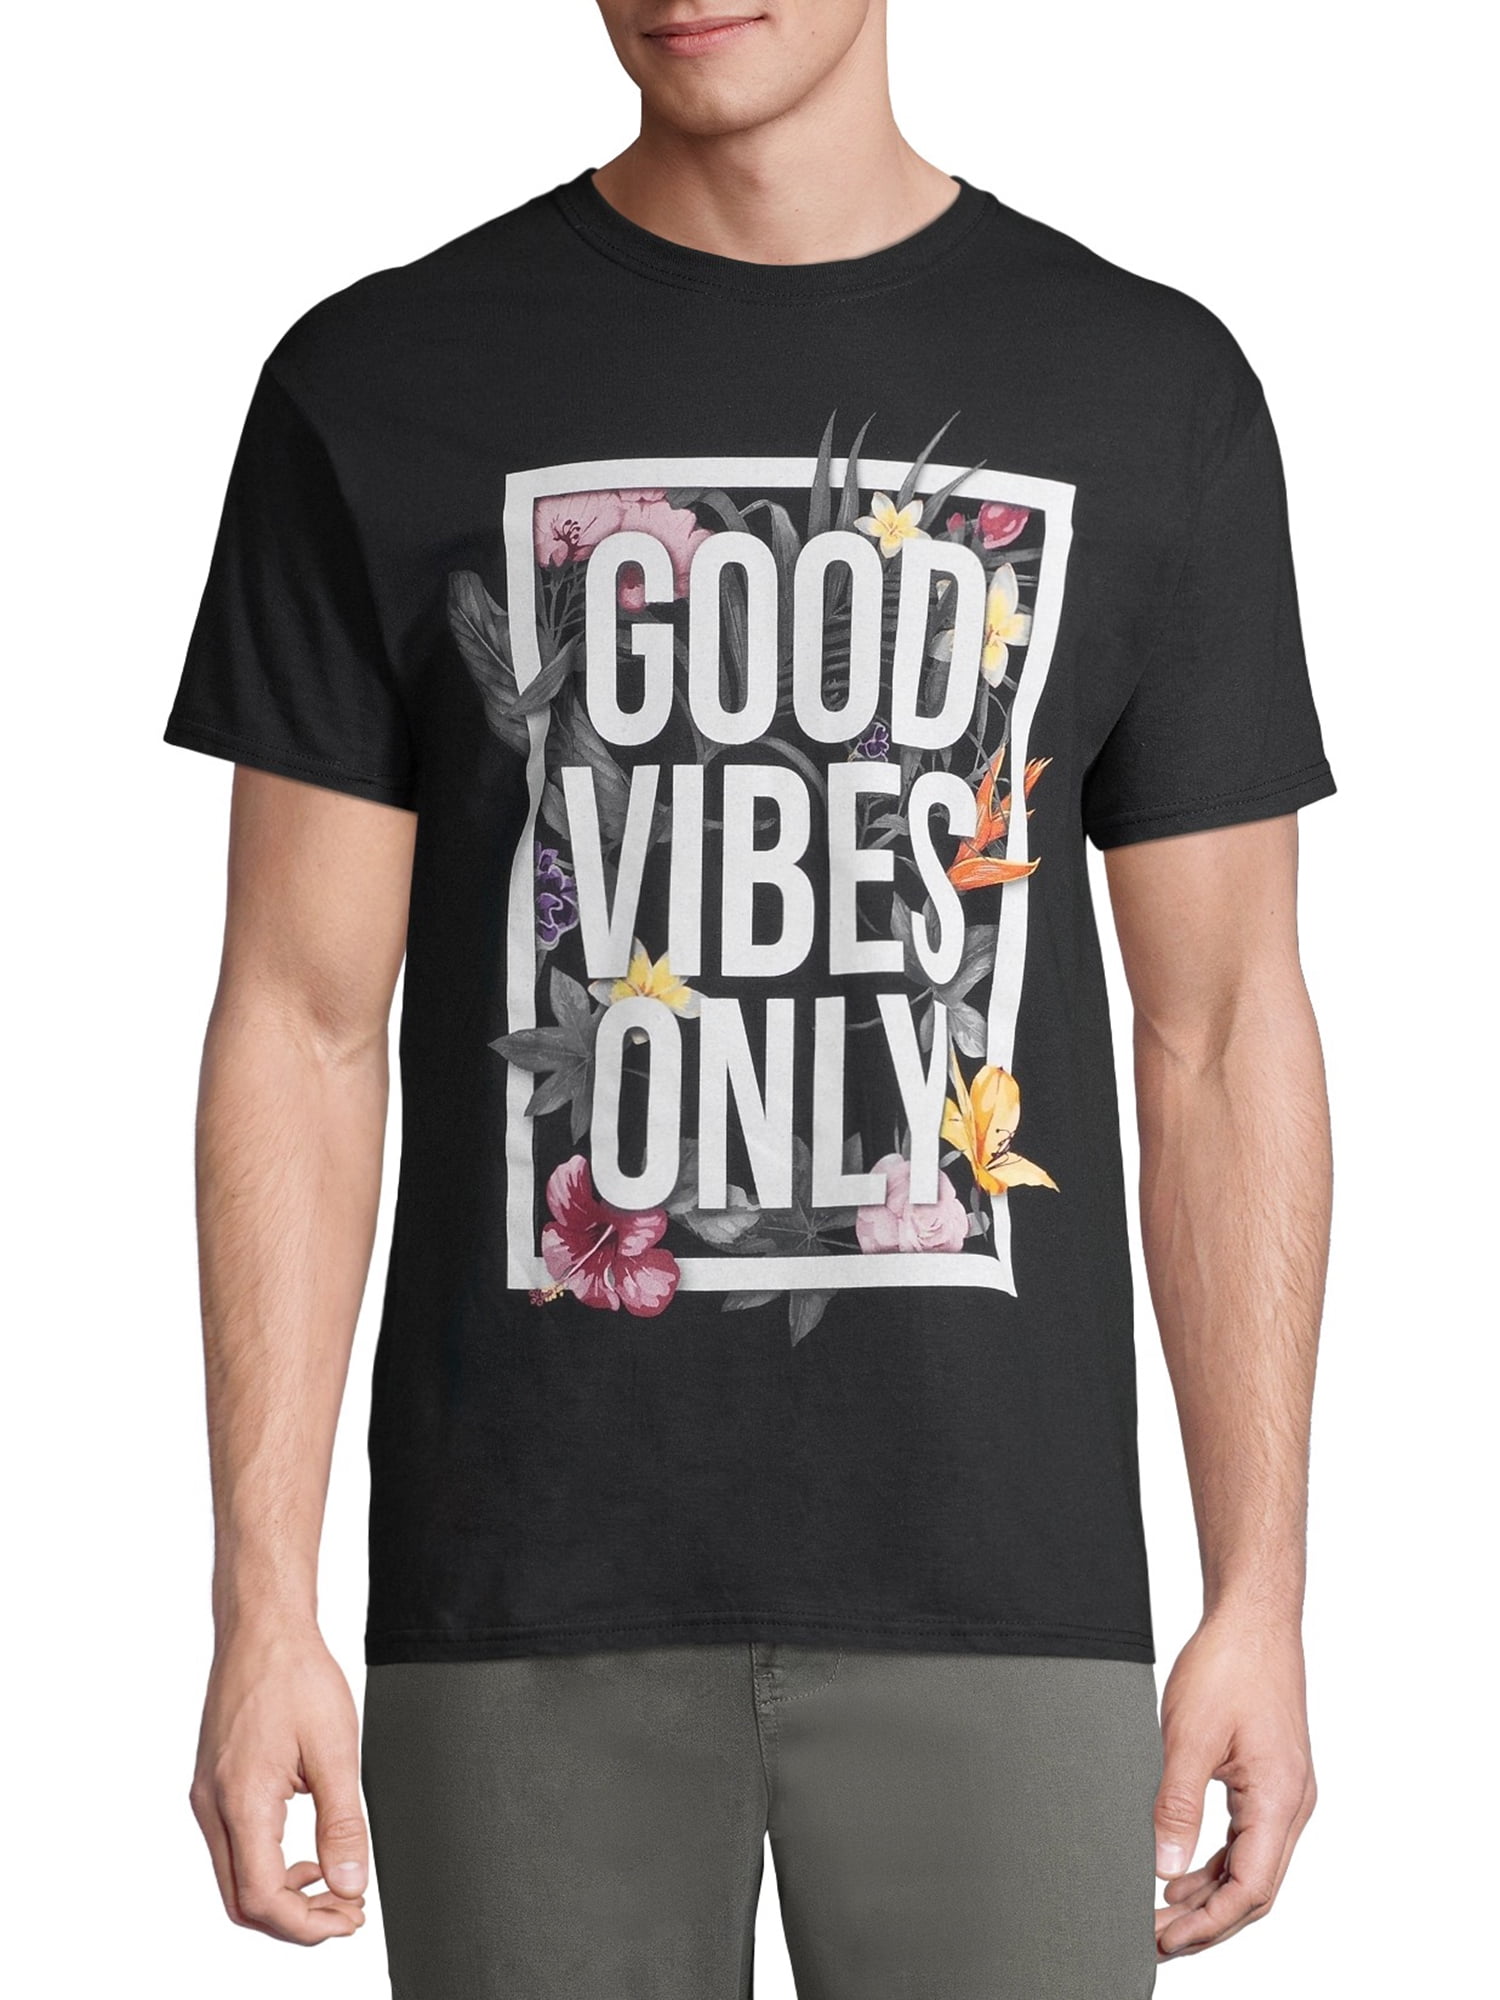 Viewer Goodwill En smule Good Vibes Only Floral Men's and Big Men's Graphic T-shirt - Walmart.com